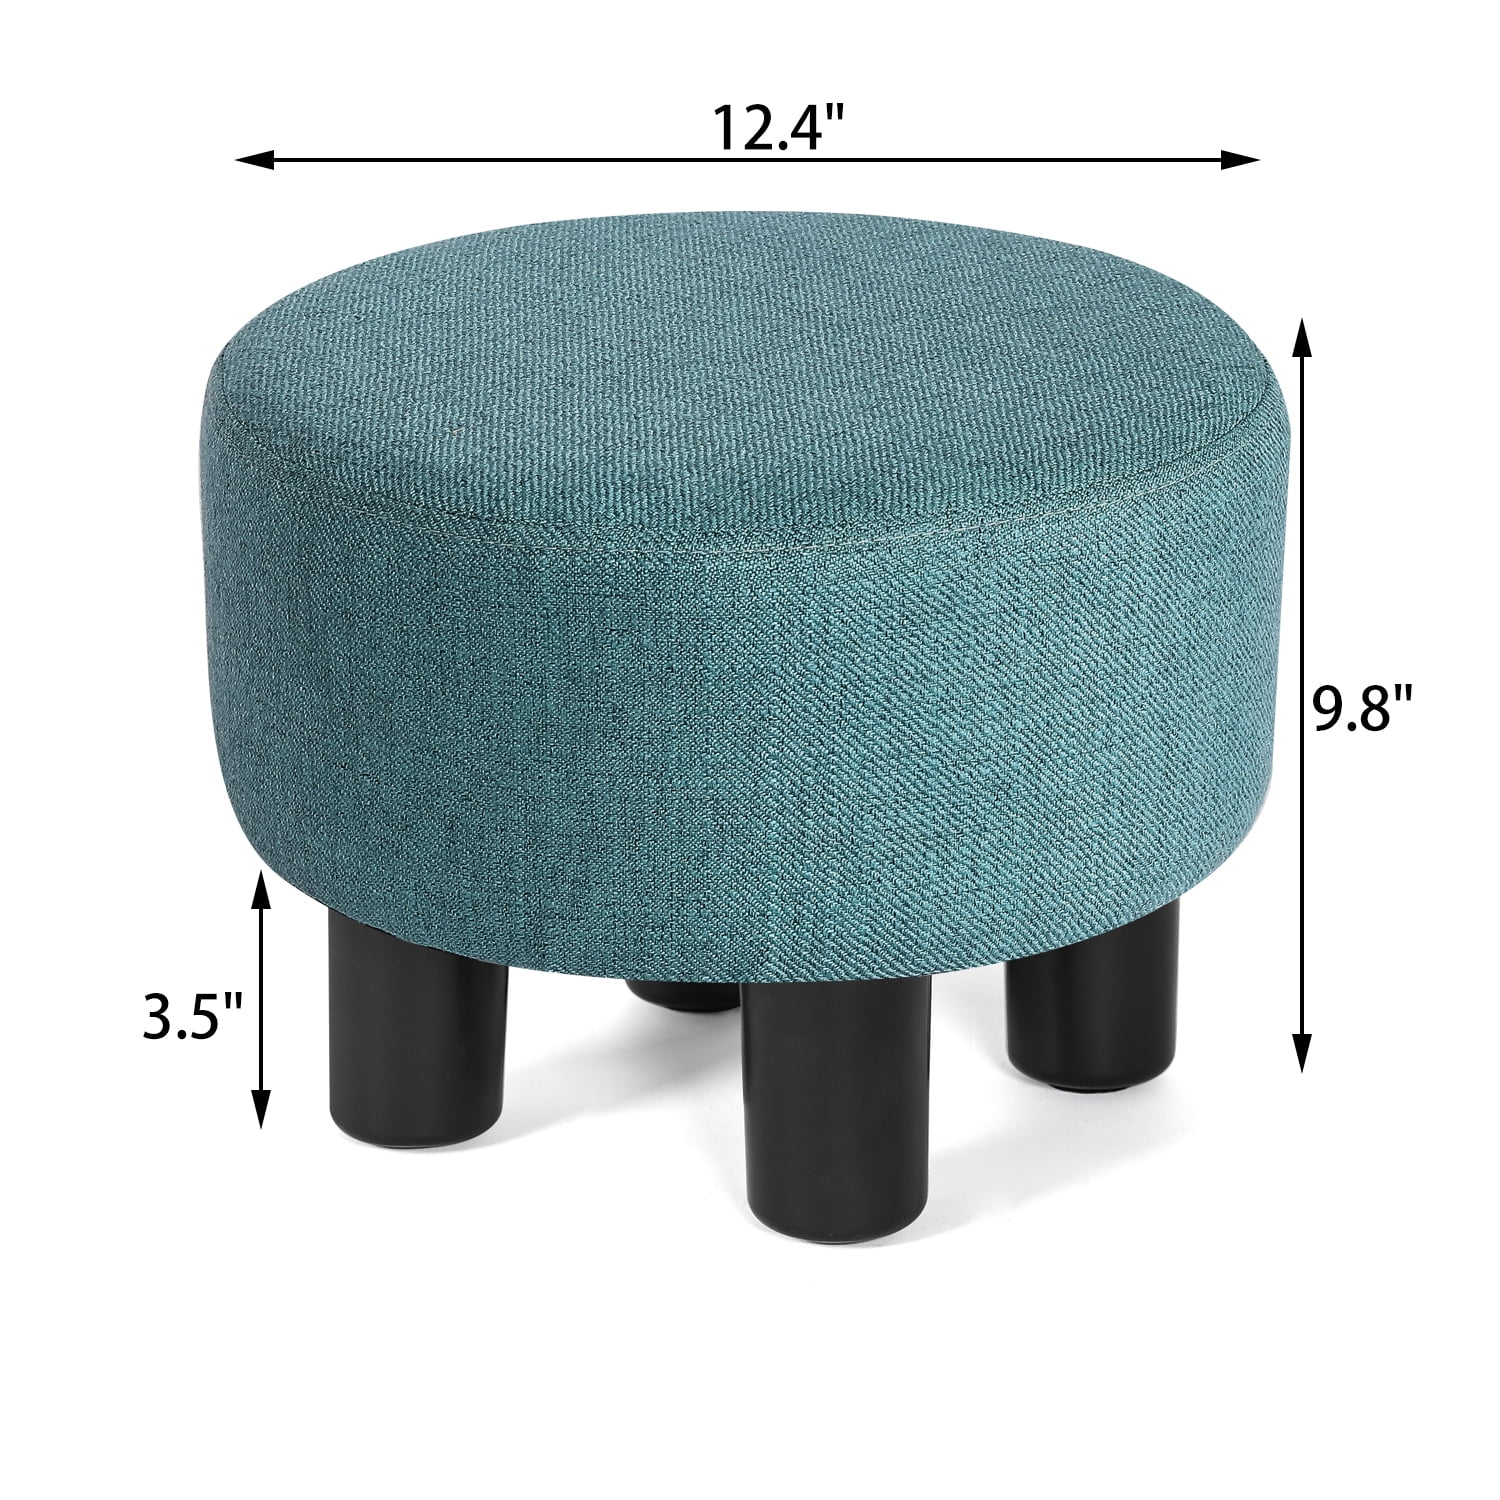 Small Foot Stools, Round Blue Padded Ottoman Foot Rest with Plastic Legs,  Footstools and Ottomans Small Comfy Footstool Upholstered for Living Room,  C for Sale in West Covina, CA - OfferUp